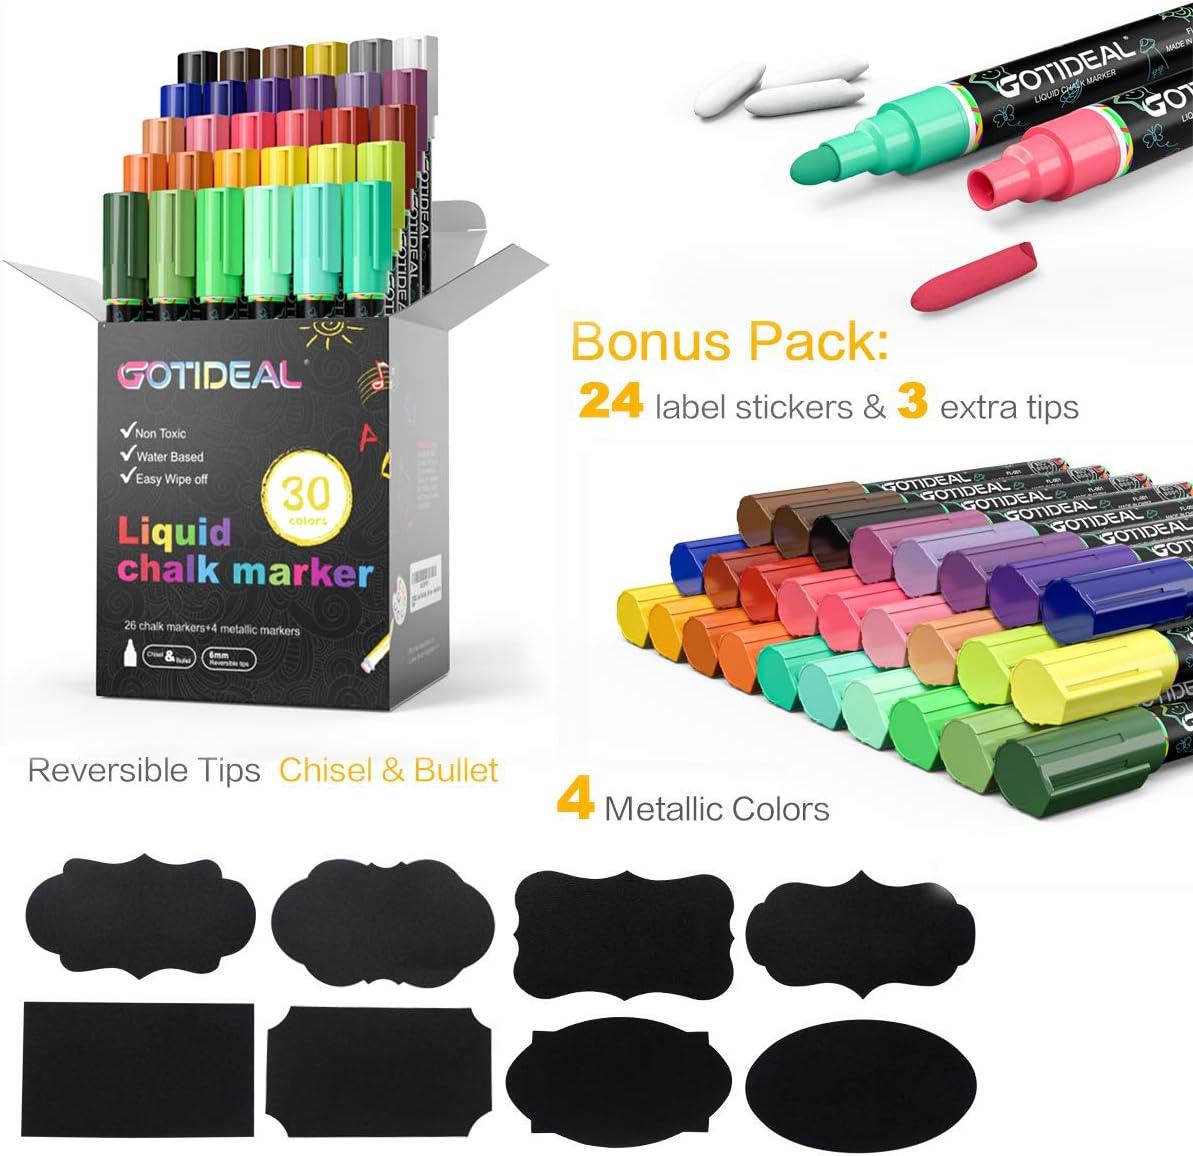 GOTIDEAL Liquid Chalk Markers, 30 colors Premium Window Chalkboard Neon  Pens, Including 4 Metallic Colors, Painting and Drawing for Kids and  Adults, Bistro & Restaurant, Wet Erase - Reversible Tip